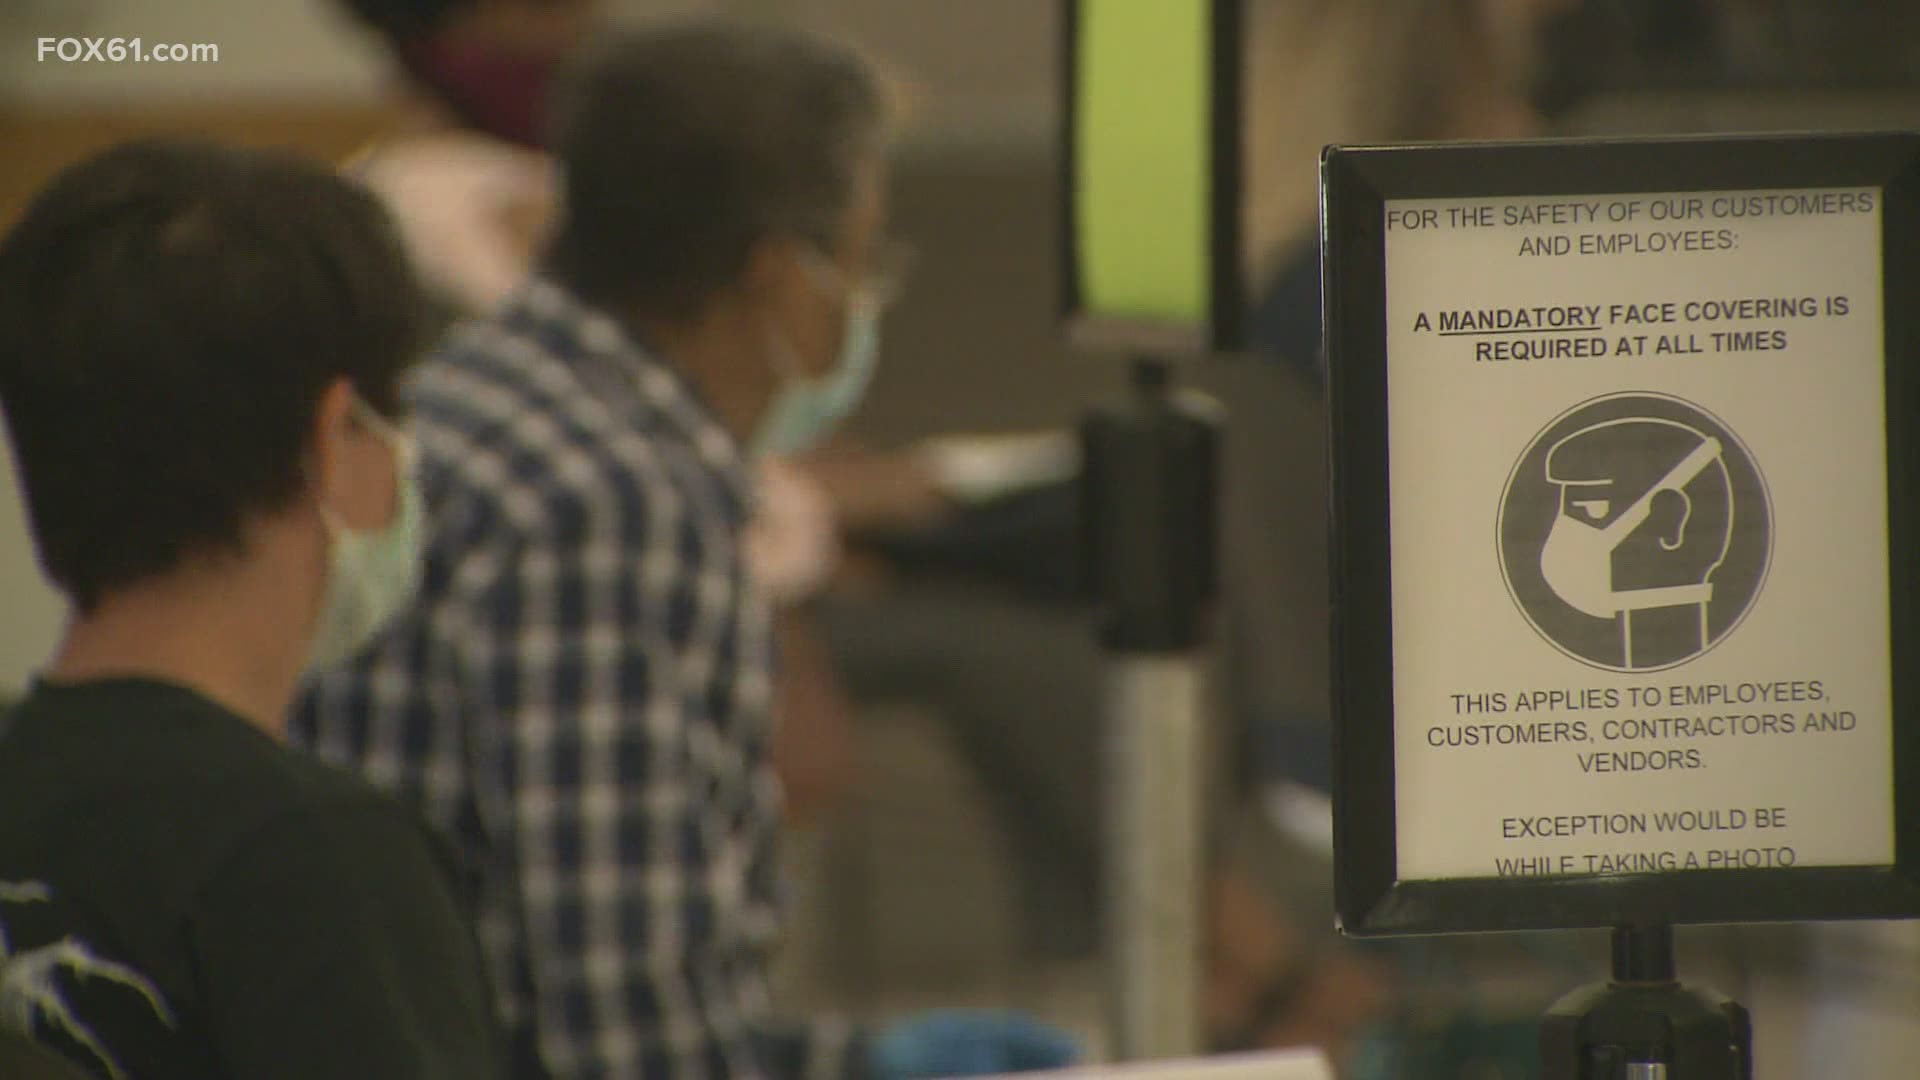 The DMV also just launched a new Stamford location that opened the first week of August.